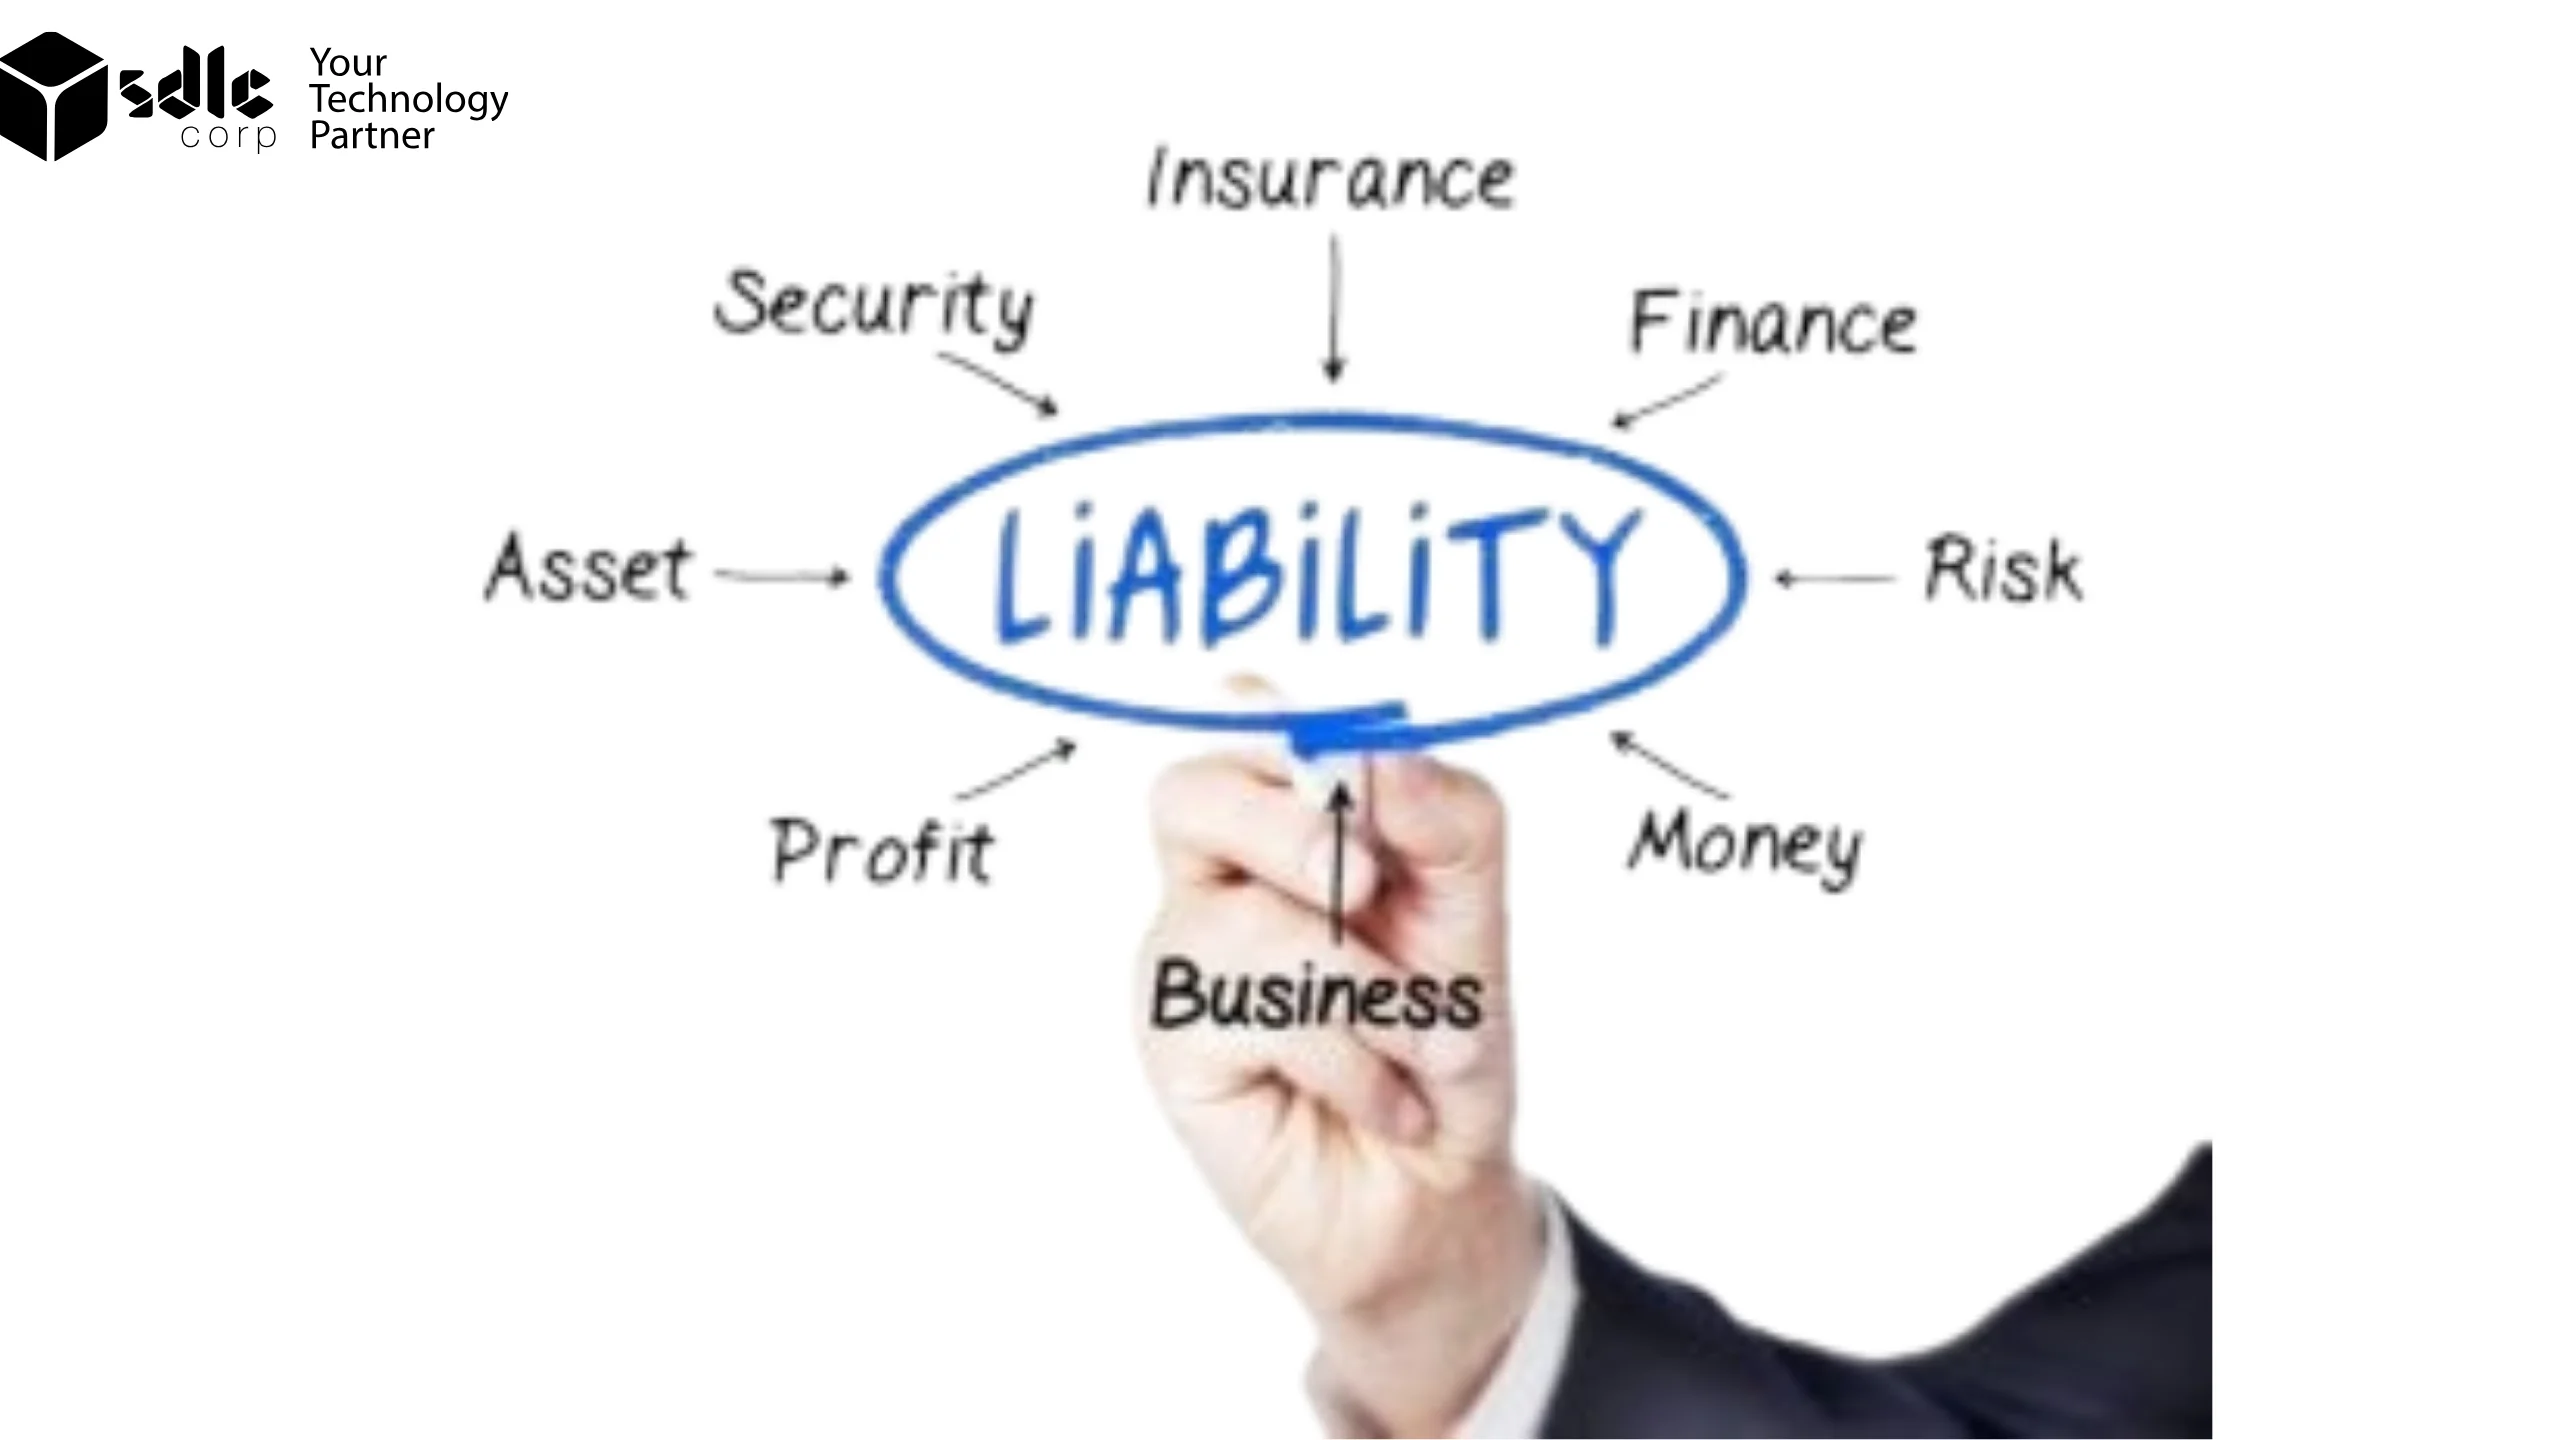 A liability is a financial obligation or debt that an individual, business, or organization owes to another party. Liabilities can arise from borrowing money